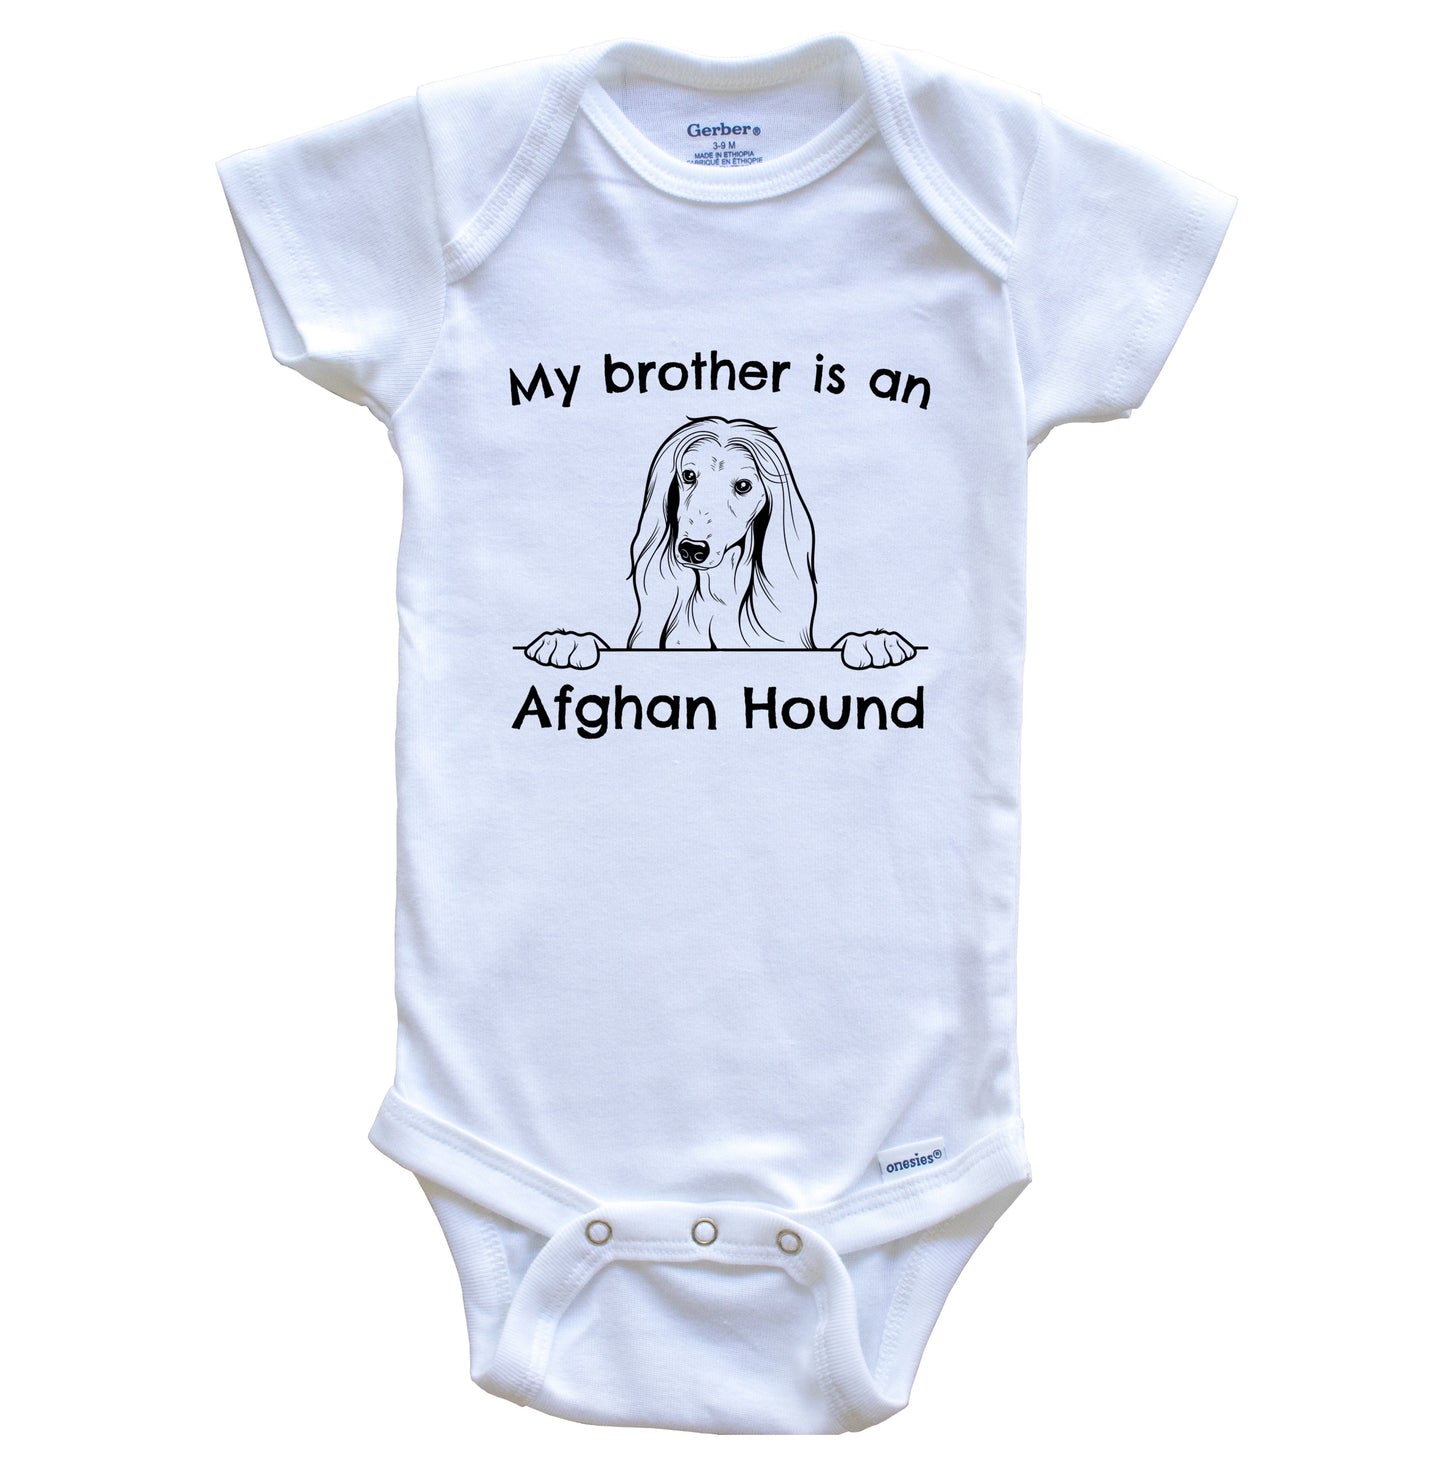 My Brother Is An Afghan Hound One Piece Baby Bodysuit